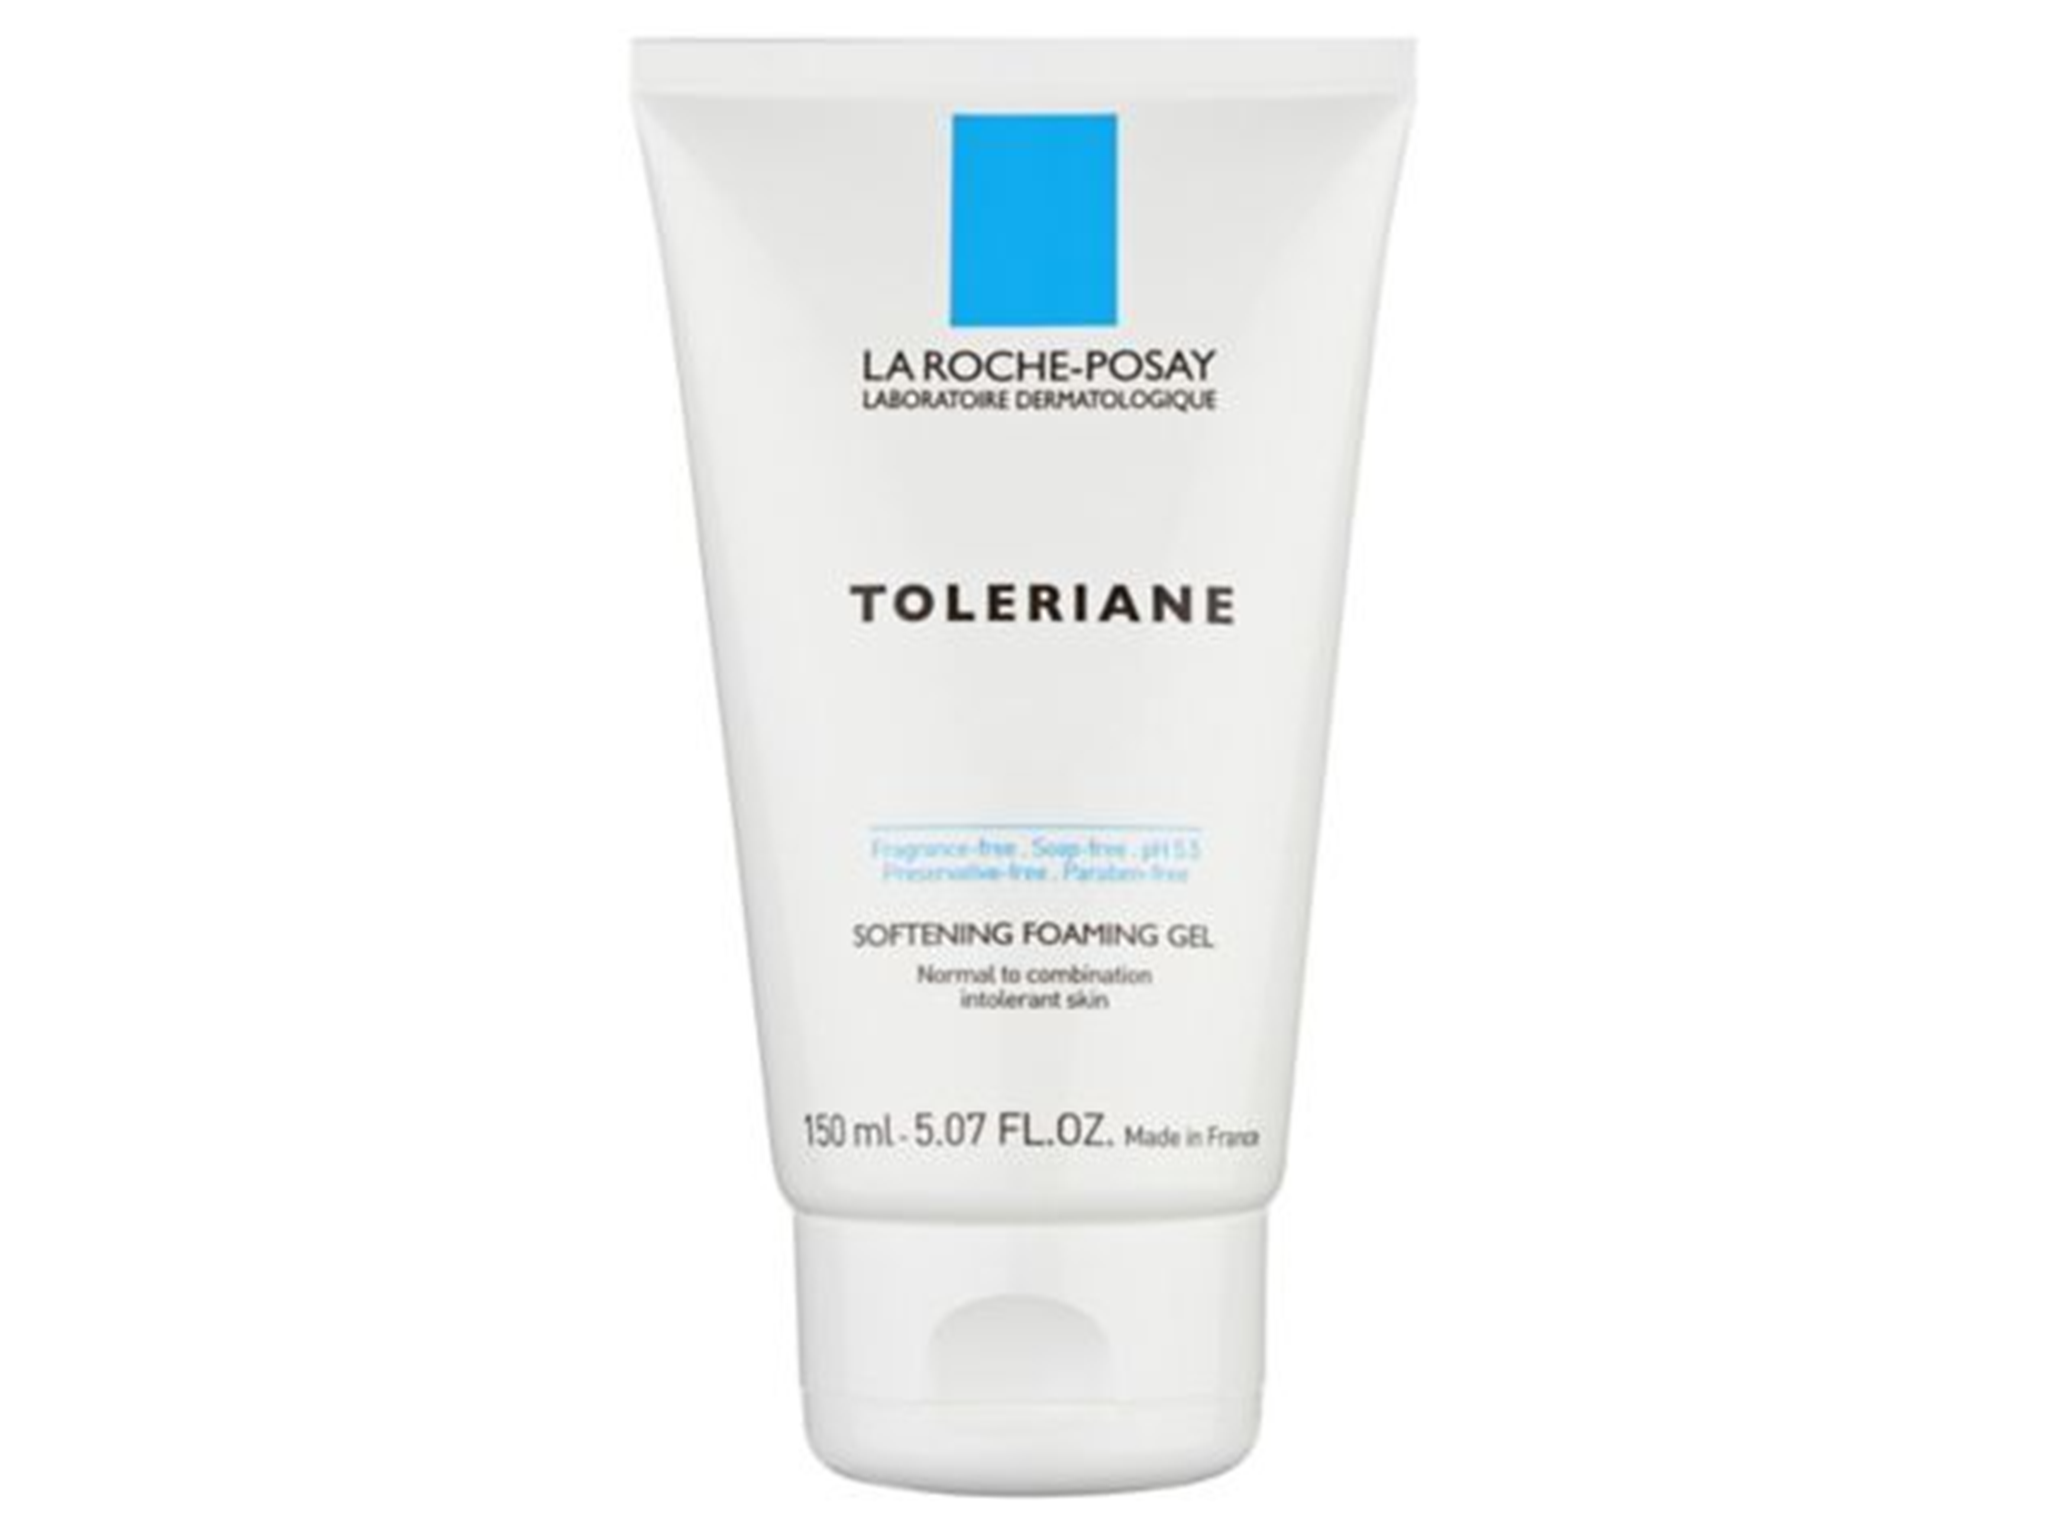 11 La Roche-Posay products: baume, sunscreen, cleanser and more | The Independent